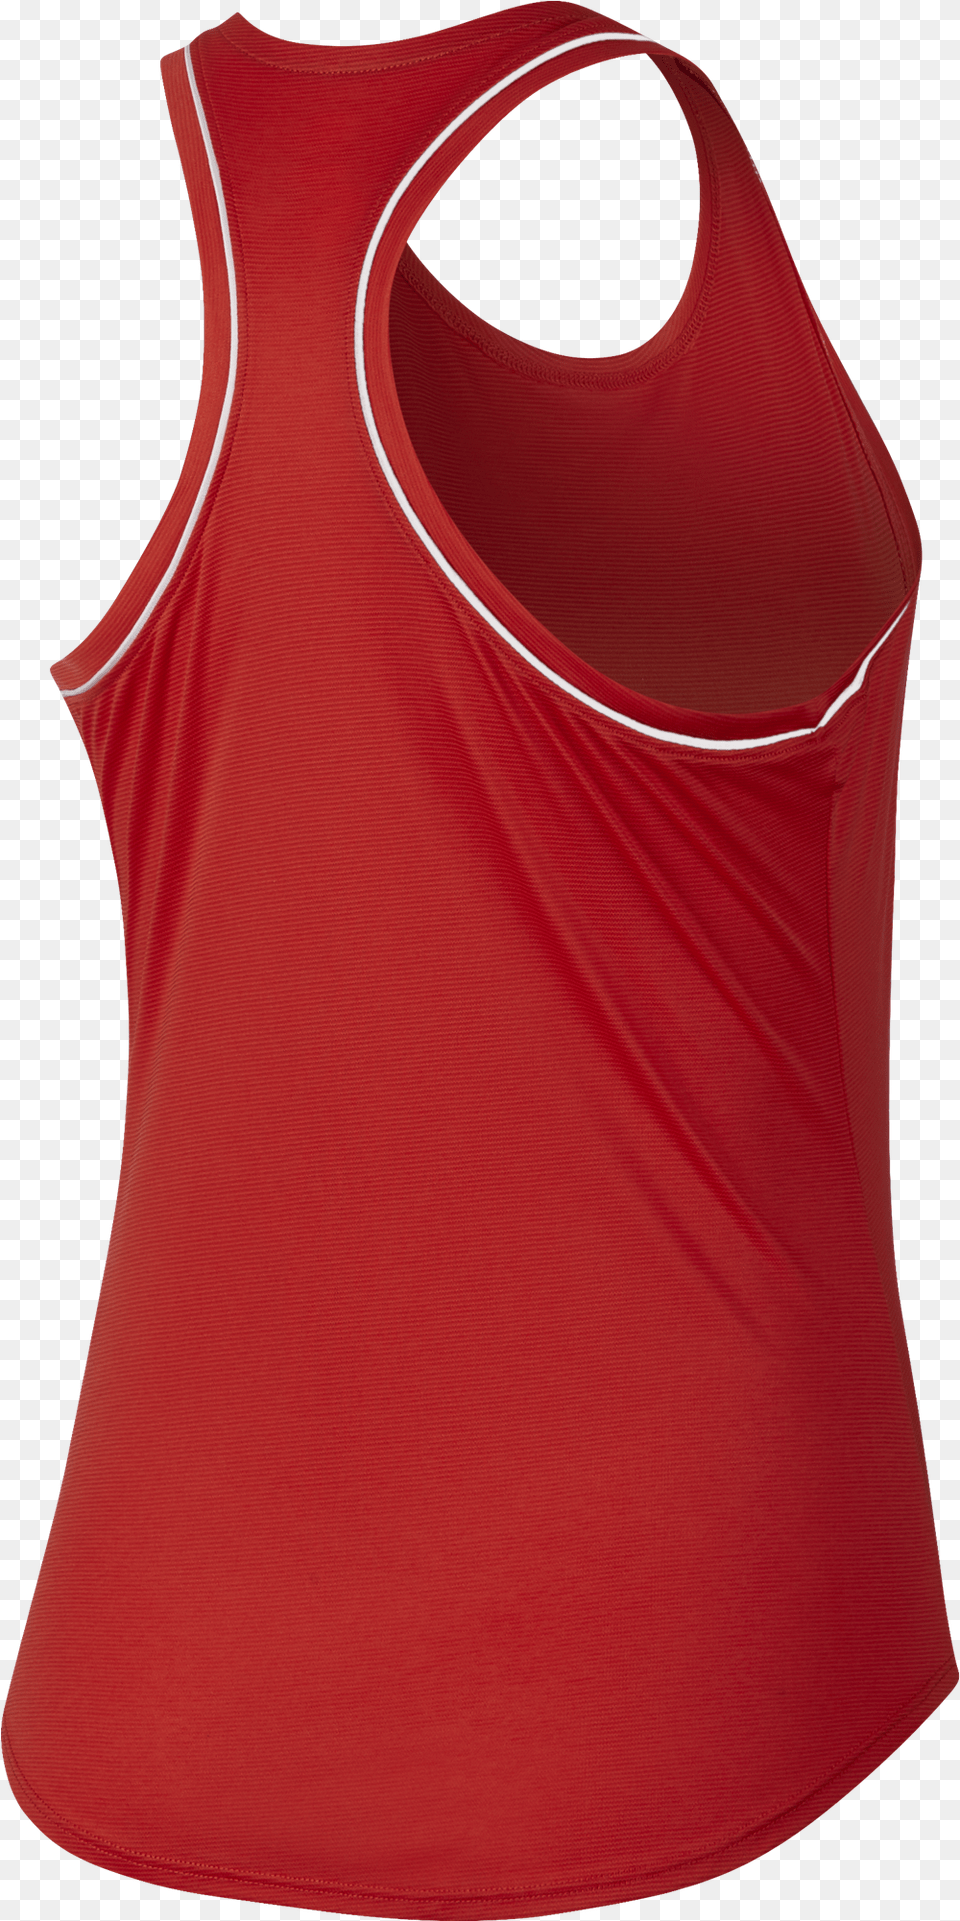 Red Nike Tank 58ce49 Sleeveless Tee Futura Icon, Clothing, Tank Top, Adult, Female Free Transparent Png